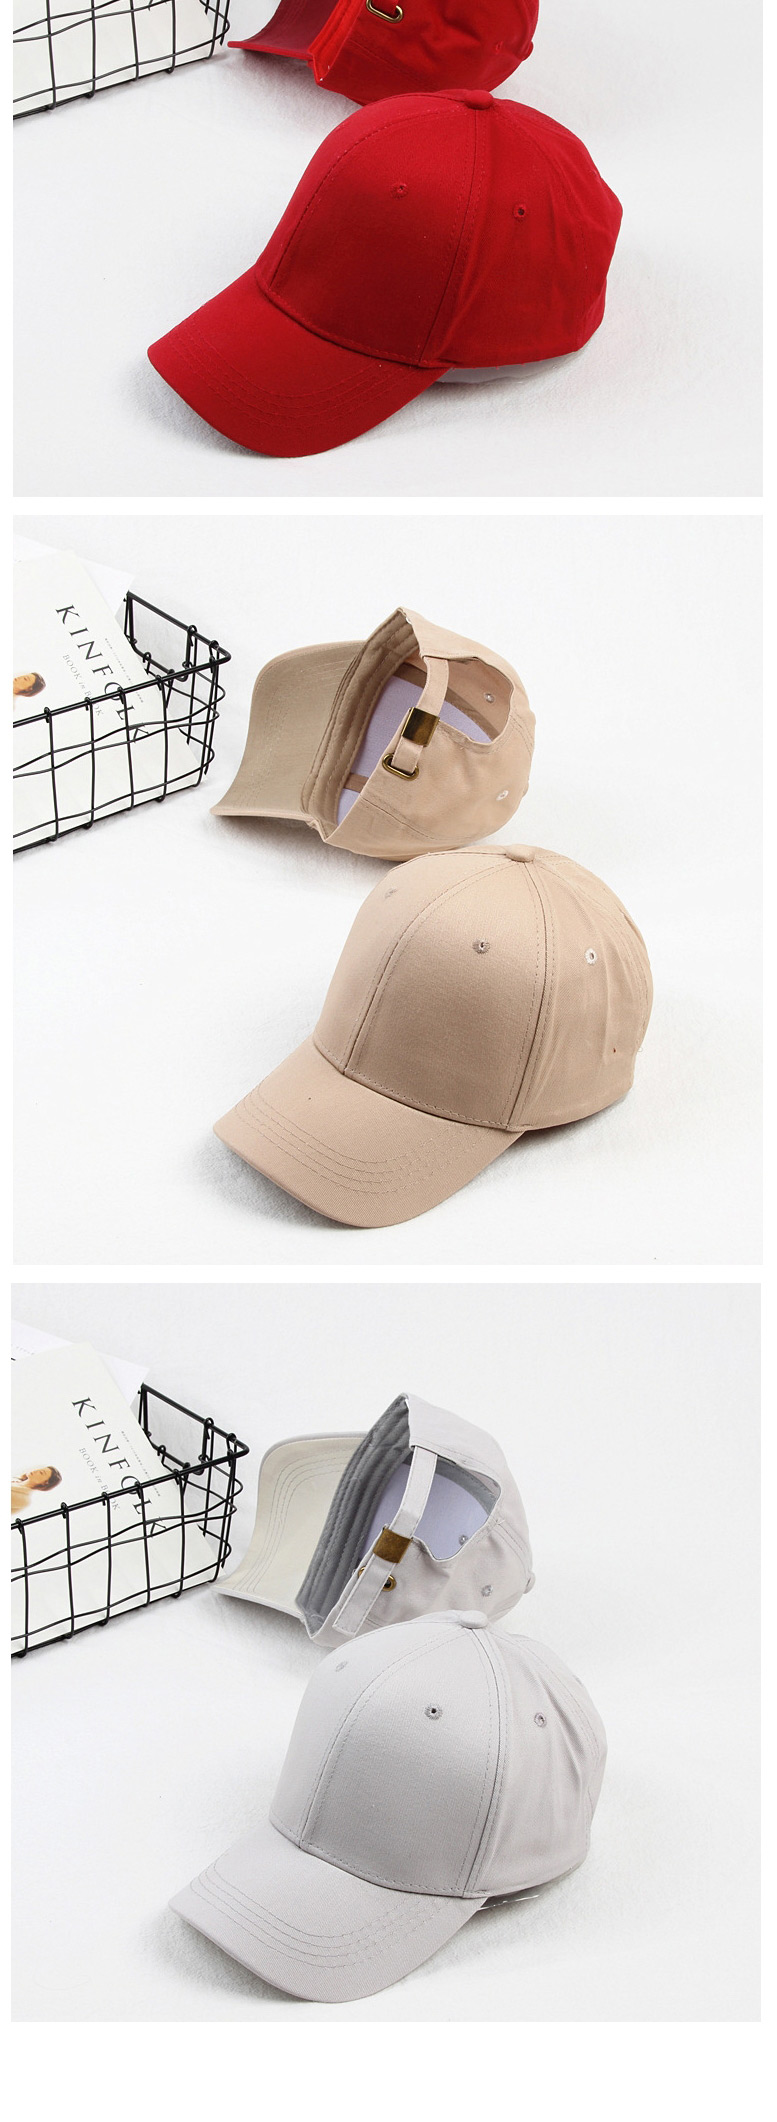 Fashion Light Gray Solid Color Cotton Cap With Curved Brim,Baseball Caps